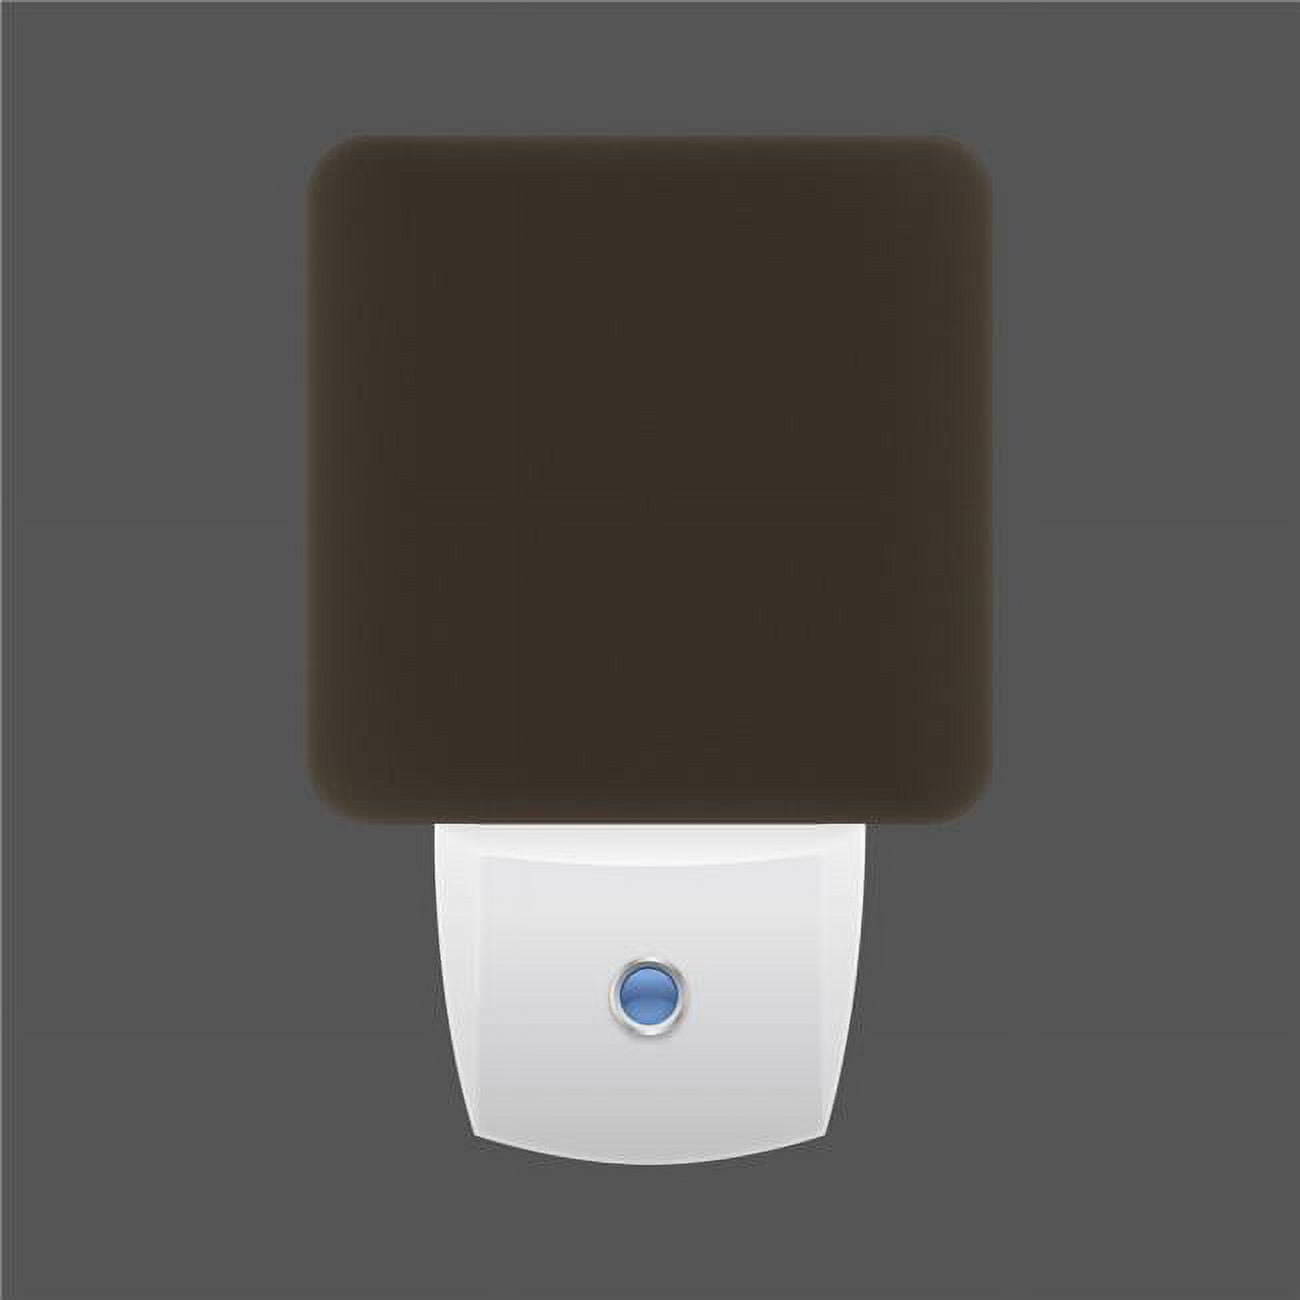 40009 Costabrown Led Night Light